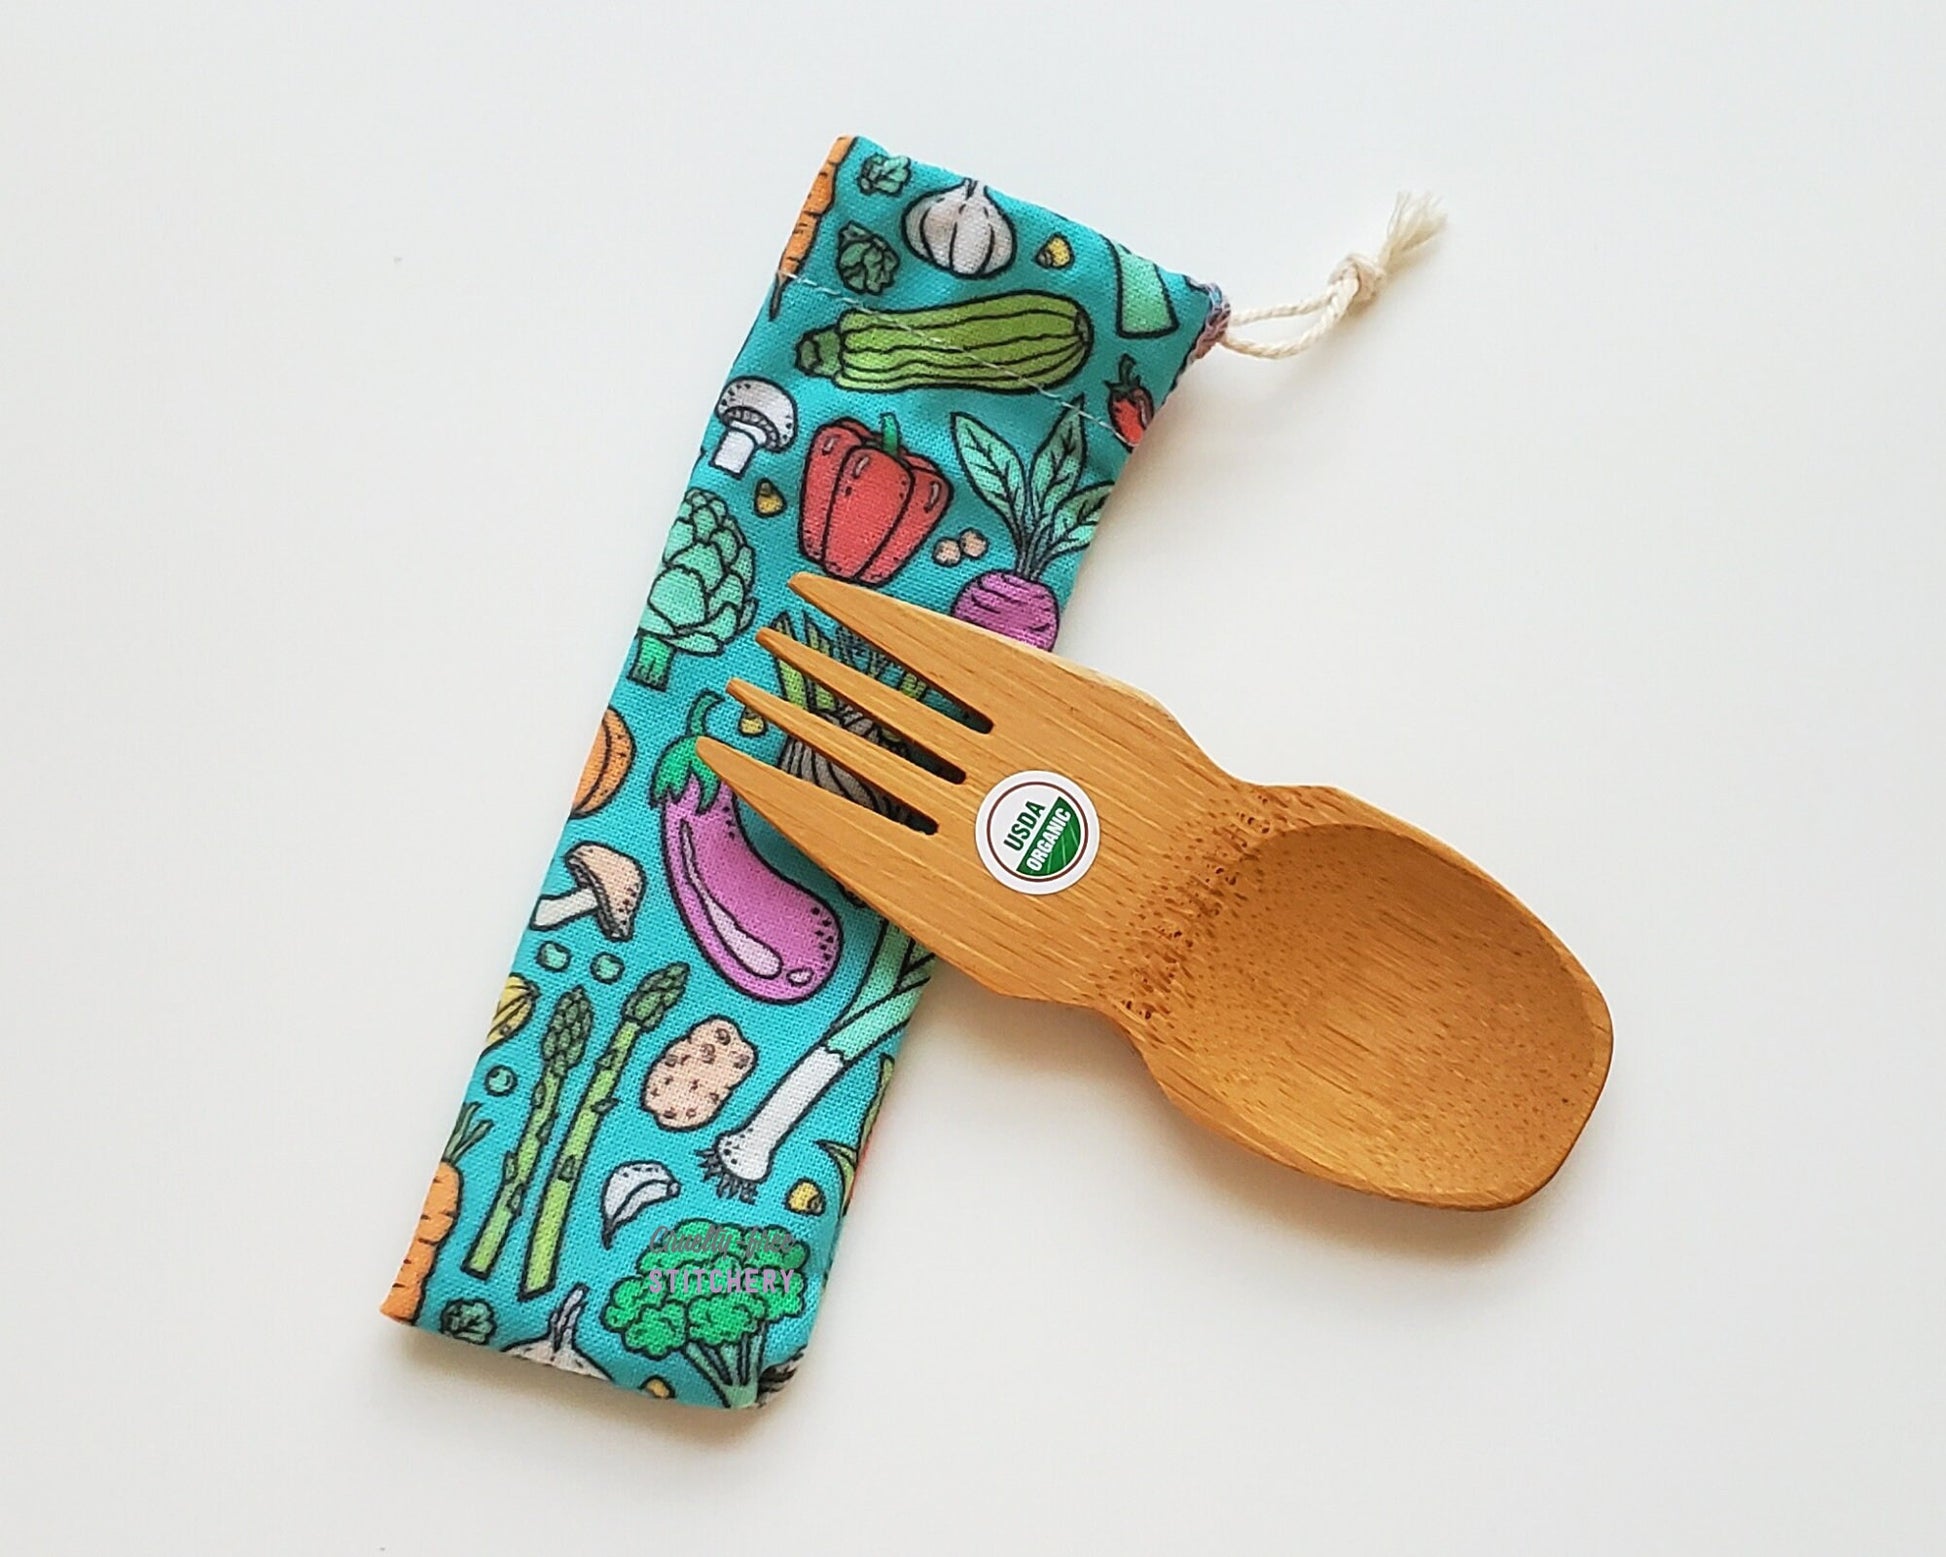 Reusable bamboo spork with pouch. The pouch is a teal blue fabric with various cartoon vegetables. The pouch is sitting diagonally with the spork partially on top pointing the other way. The spork is small, a double ended fork and spoon.